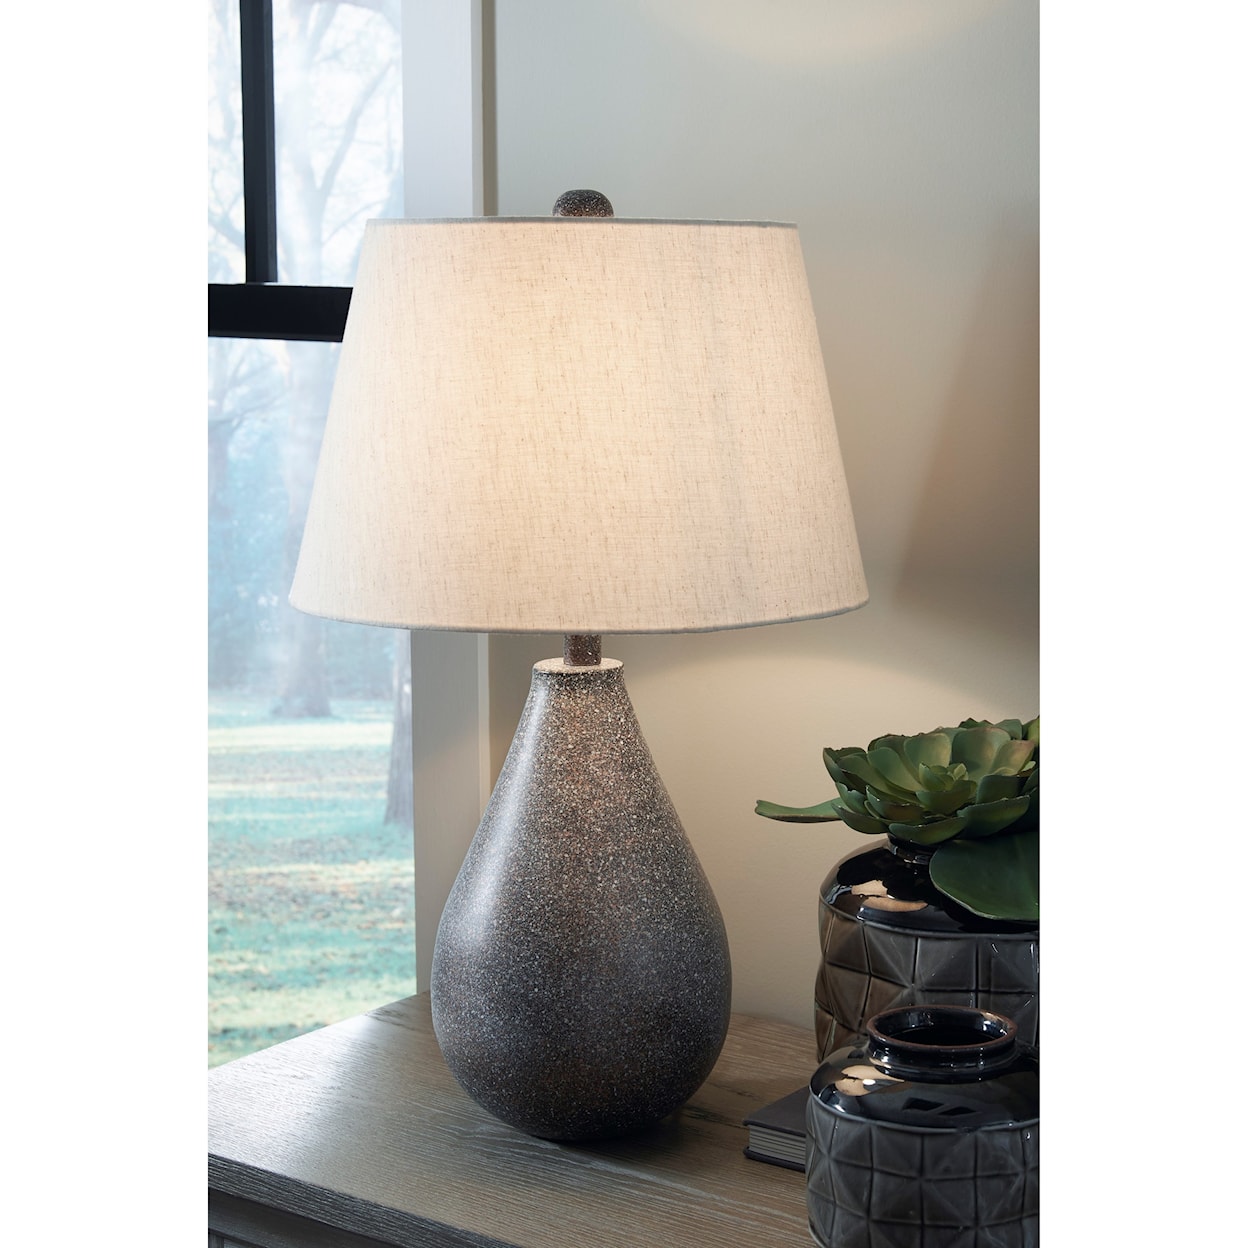 Signature Design by Ashley Lamps - Contemporary Set of 2 Bateman Patina Metal Table Lamps